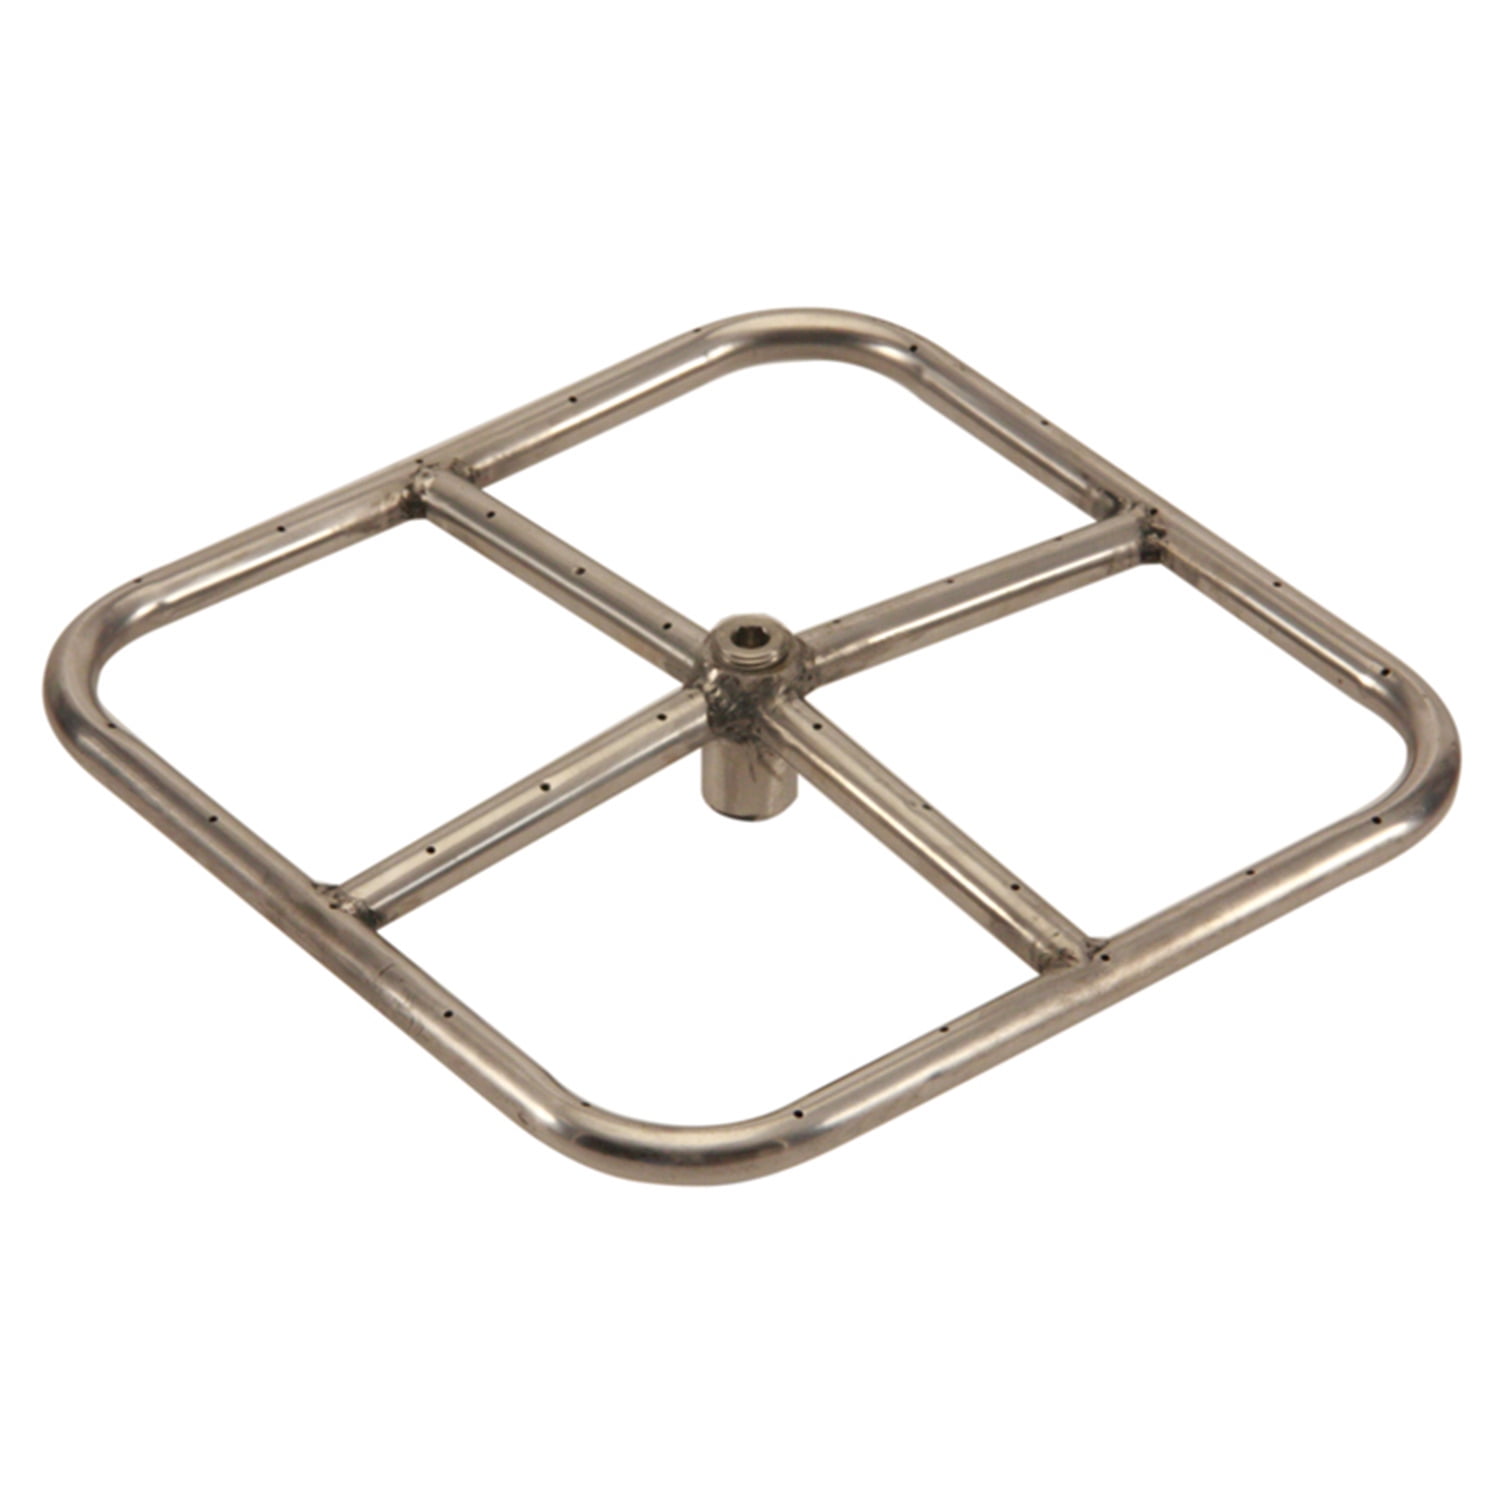 Hpc Square Stainless Steel Fire Pit, Stainless Steel Fire Pit Burner